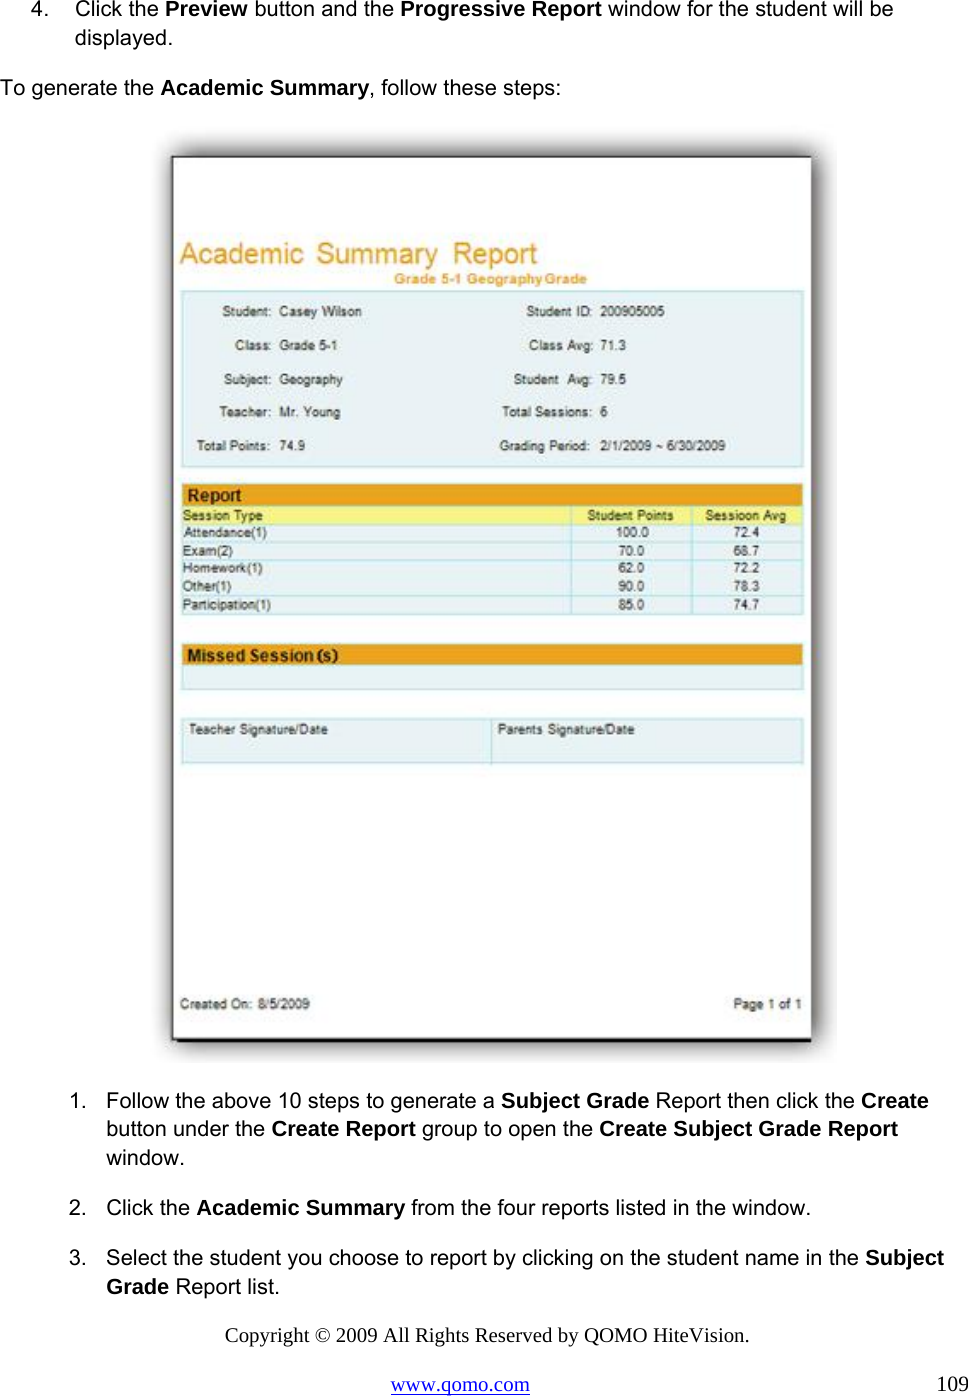 Copyright © 2009 All Rights Reserved by QOMO HiteVision. www.qomo.com                                                                          109  4. Click the Preview button and the Progressive Report window for the student will be displayed. To generate the Academic Summary, follow these steps:  1.  Follow the above 10 steps to generate a Subject Grade Report then click the Create button under the Create Report group to open the Create Subject Grade Report window. 2. Click the Academic Summary from the four reports listed in the window. 3.  Select the student you choose to report by clicking on the student name in the Subject Grade Report list. 